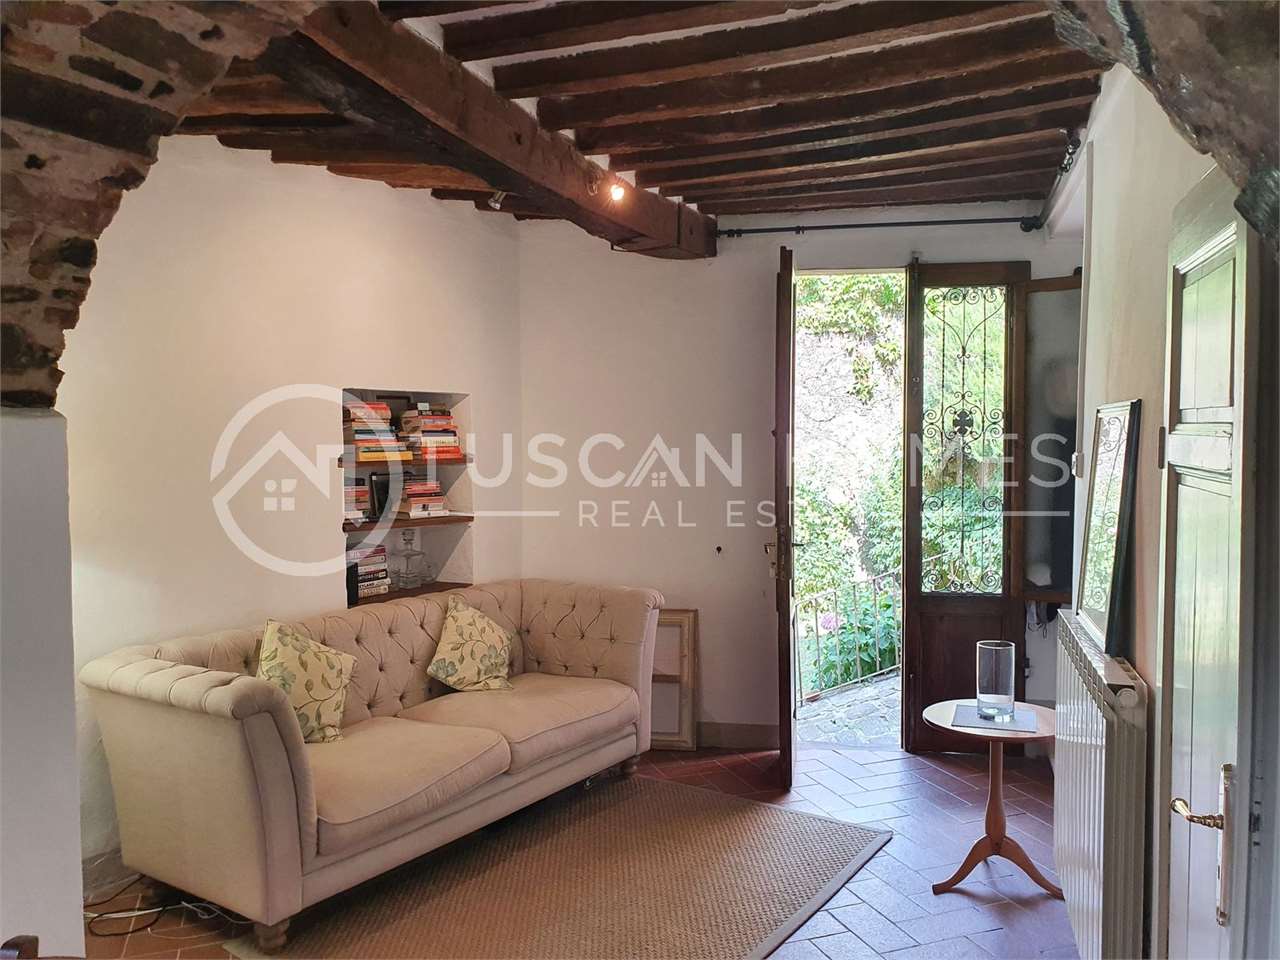 barga-italy-forsale-for-sale-views-garden-townhouse-historic-charming